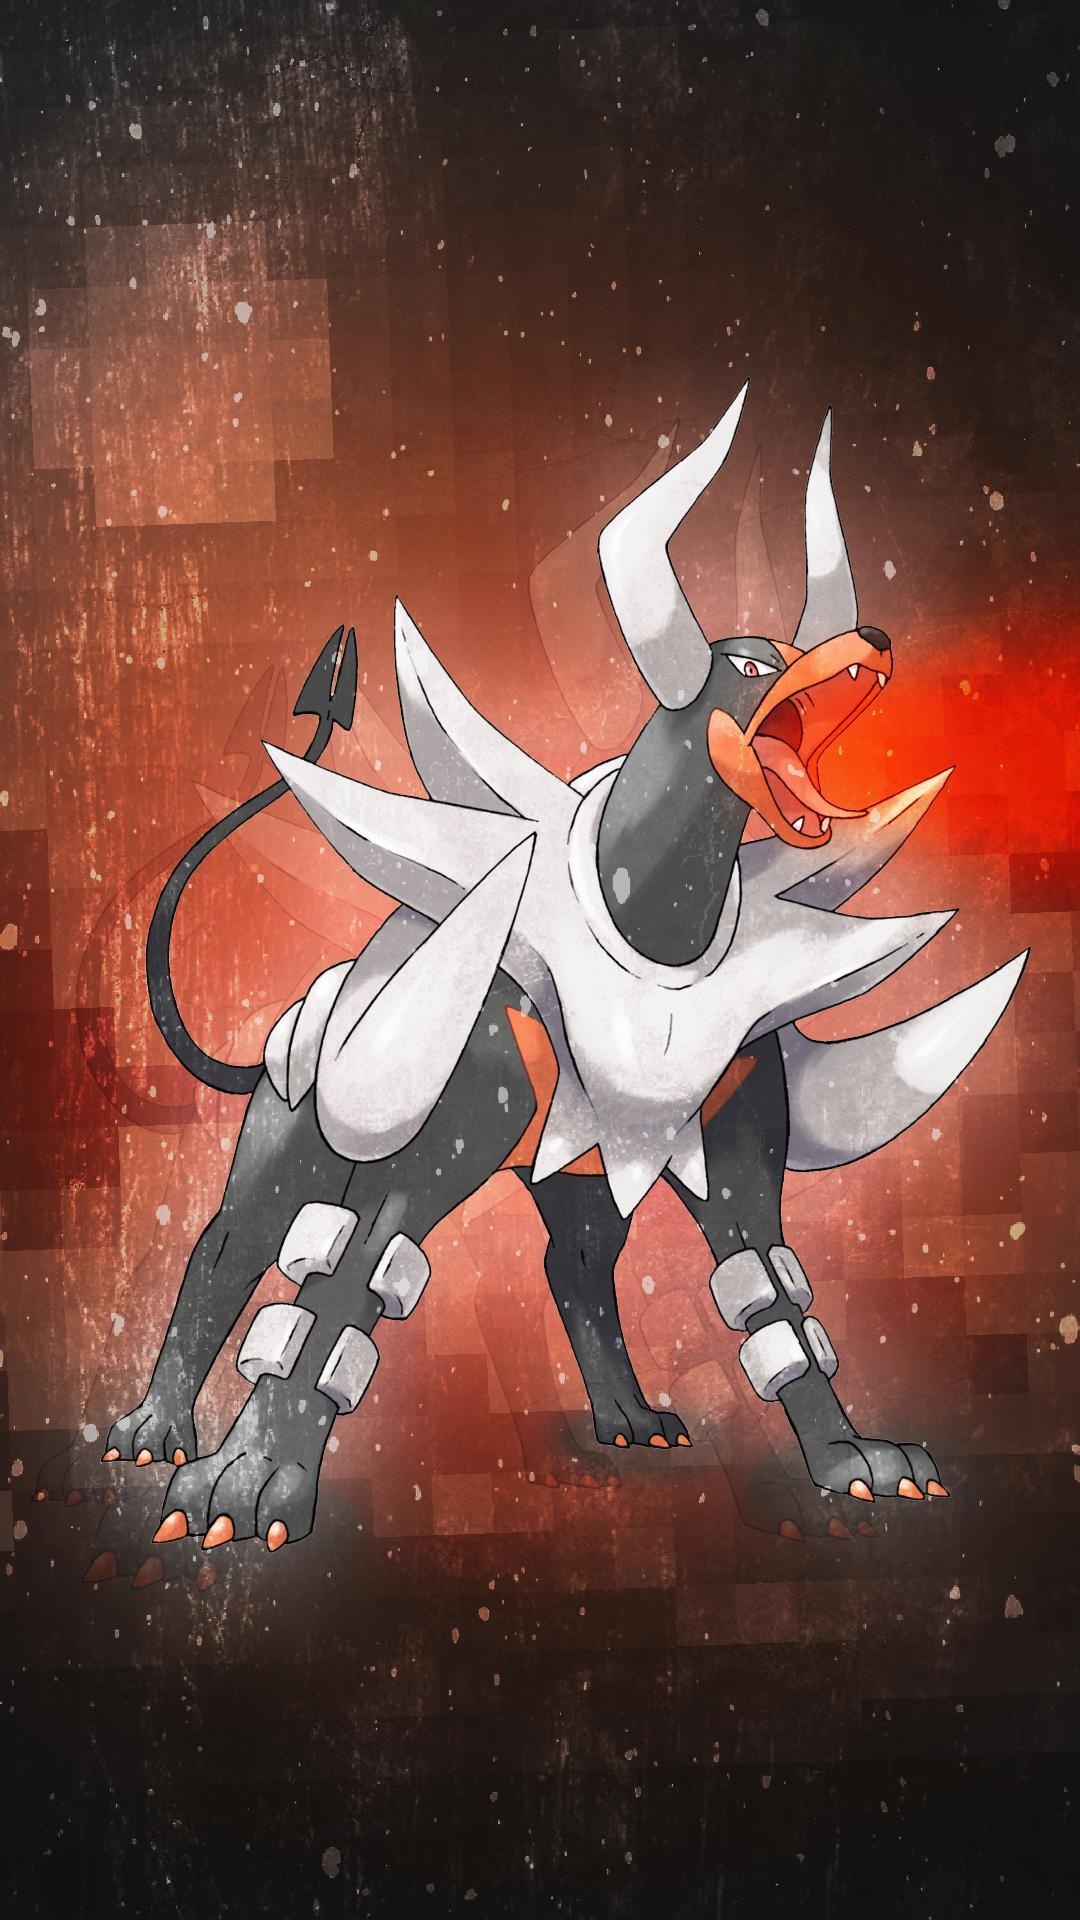 Houndoom wallpapers, Top free backgrounds, Pokemon wallpapers, Gaming enthusiasts, 1080x1920 Full HD Phone